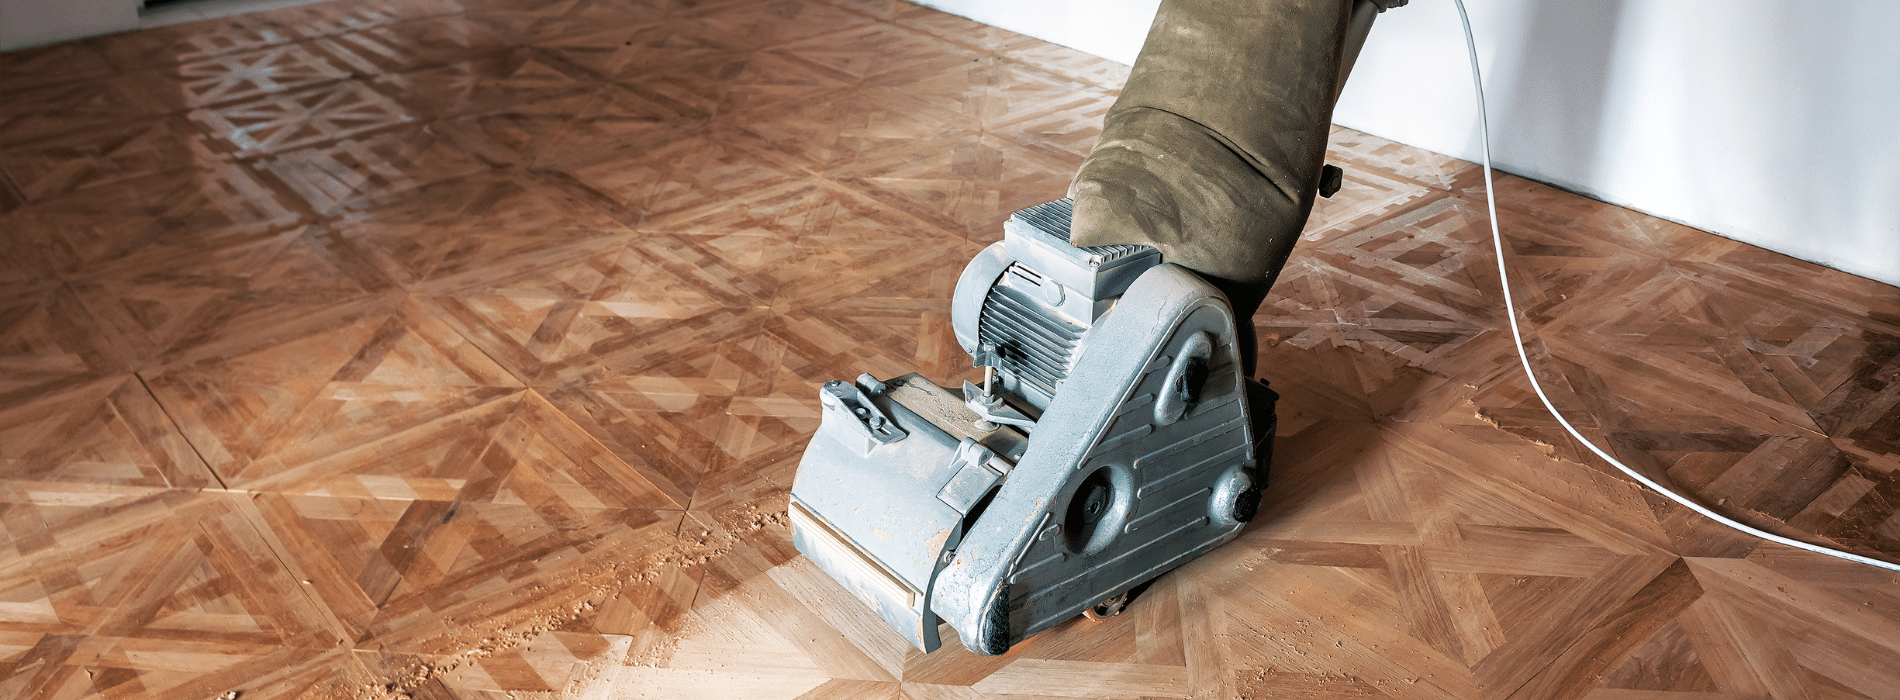 A professional Mr Sander® in Homerton, E9, operating a Bona Belt UX drum sander (2.2kW, 230V, 50Hz) on a hardwood floor. The sander, measuring 200x750mm, is connected to a high-quality HEPA-filtered dust extraction system, ensuring a clean and efficient sanding process.